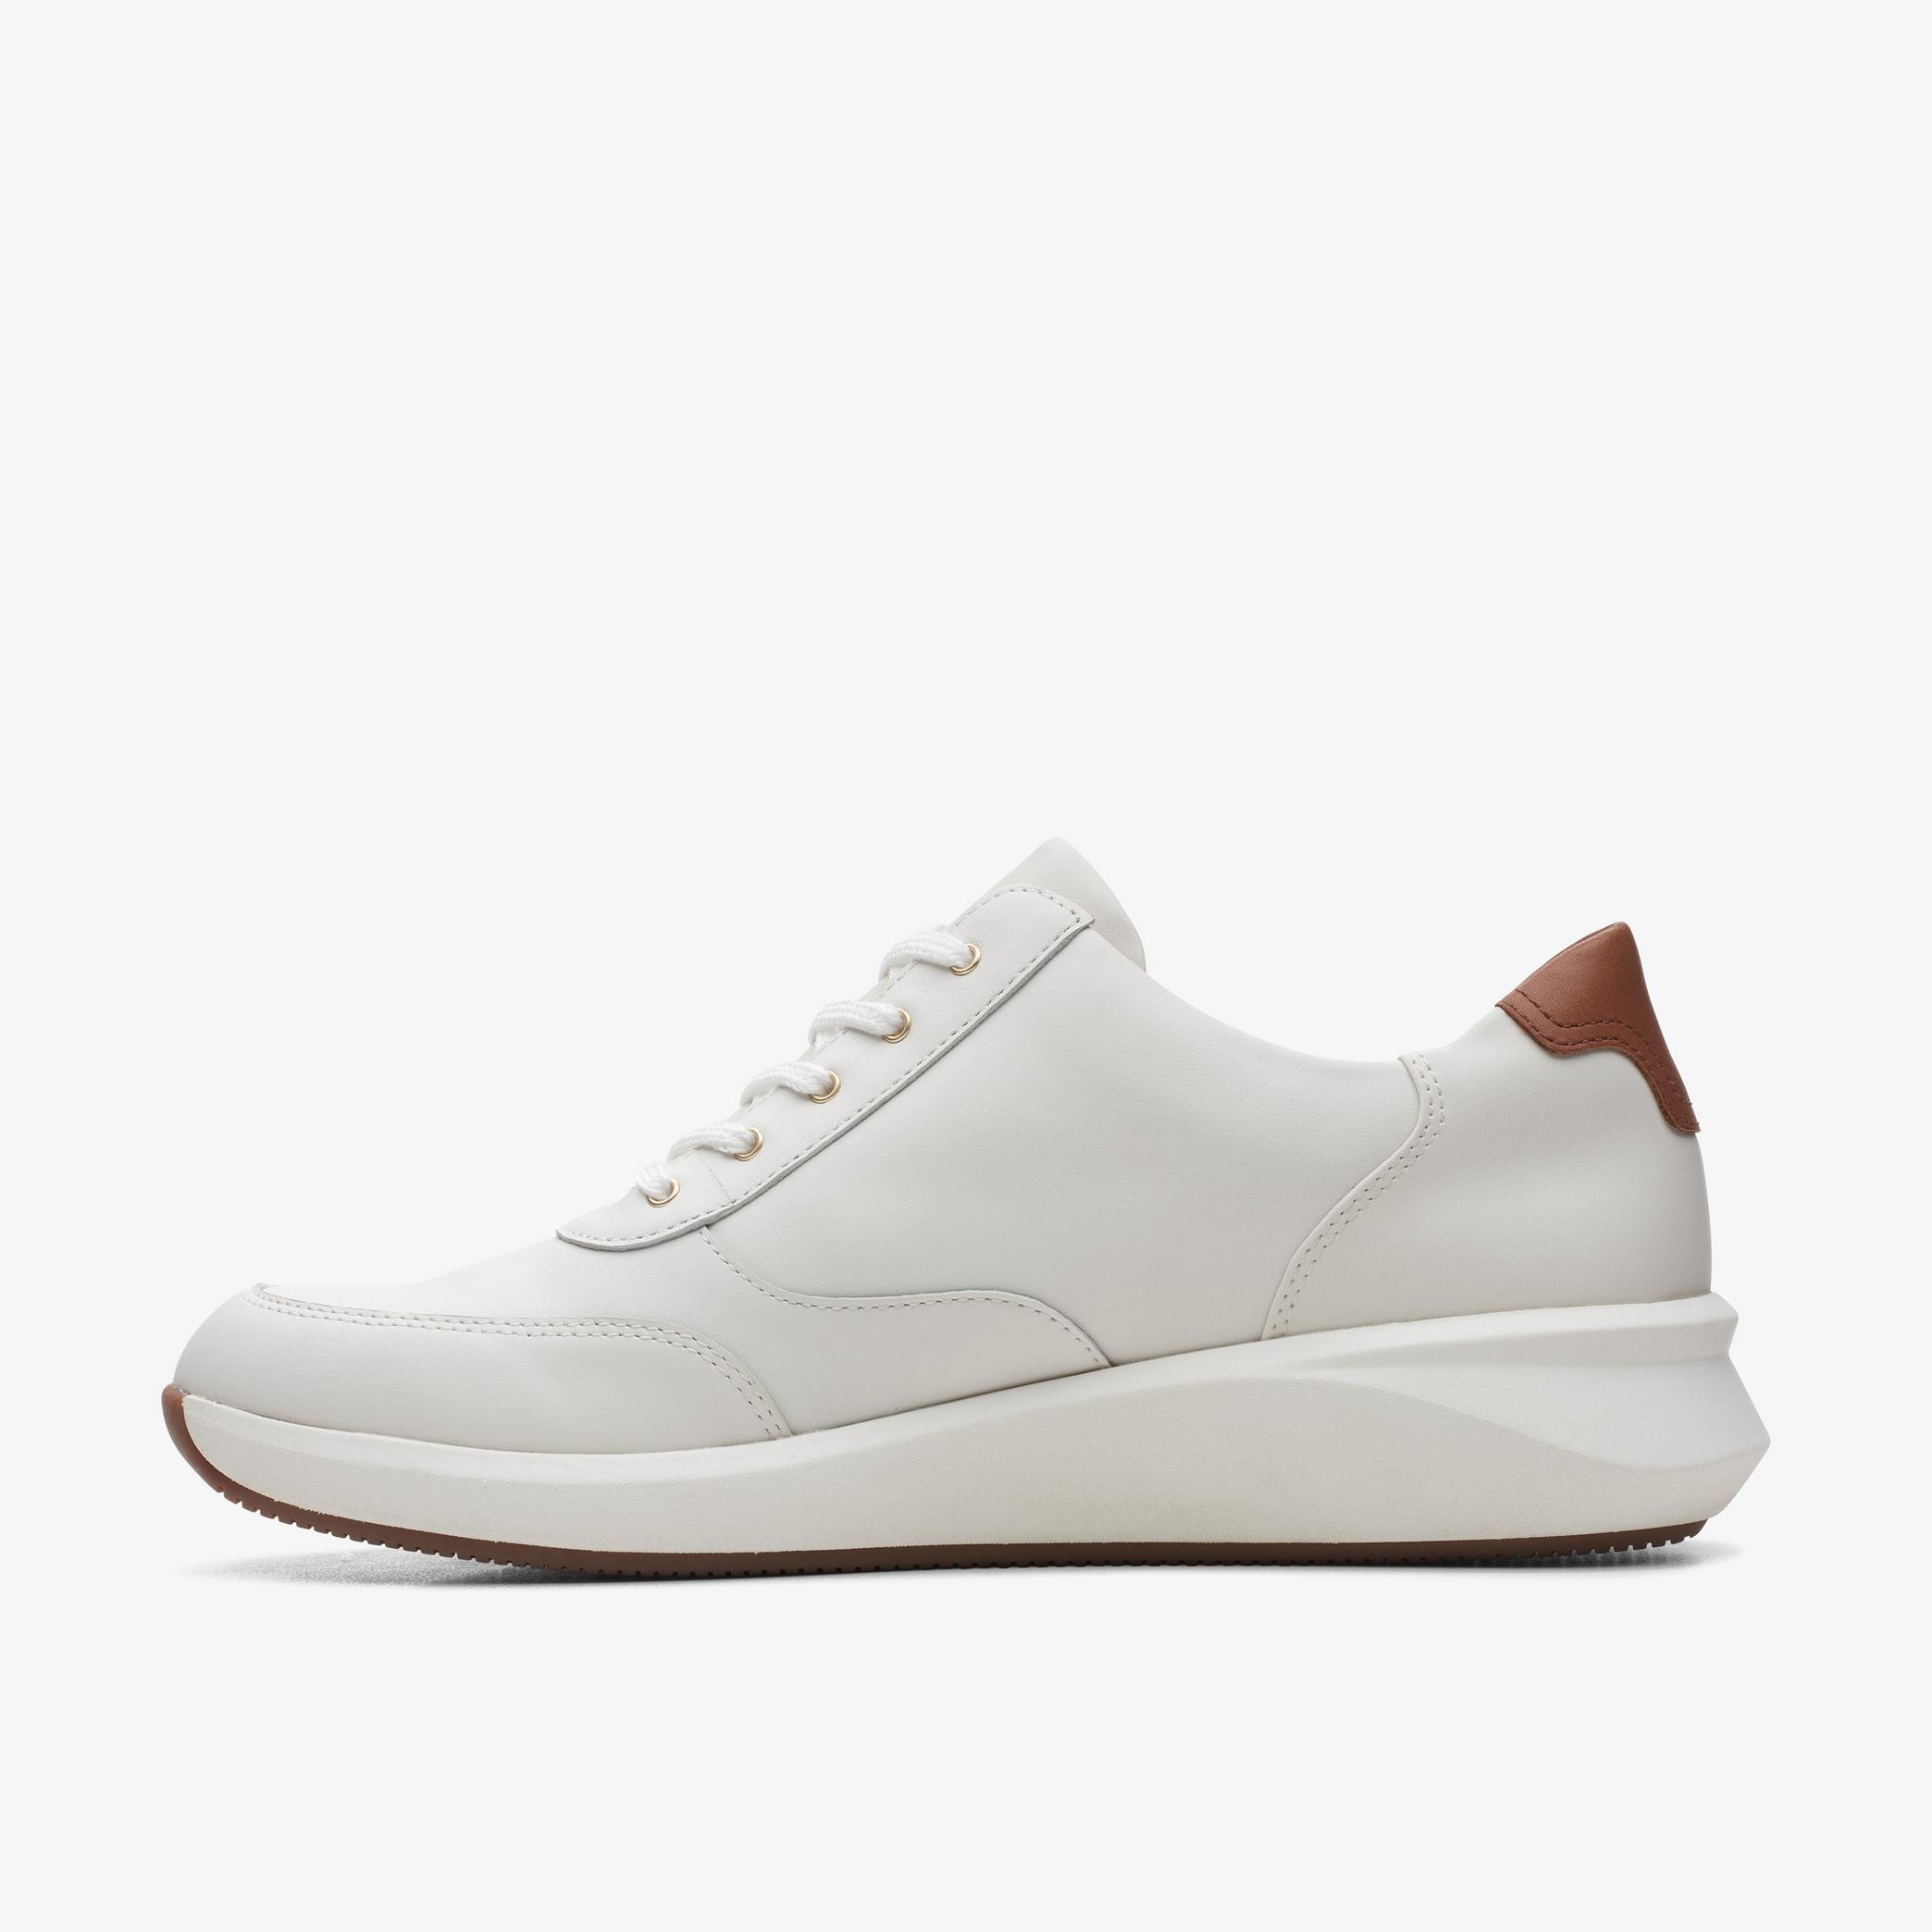 WOMENS Un Rio Zip White Leather Trainers | Clarks Outlet